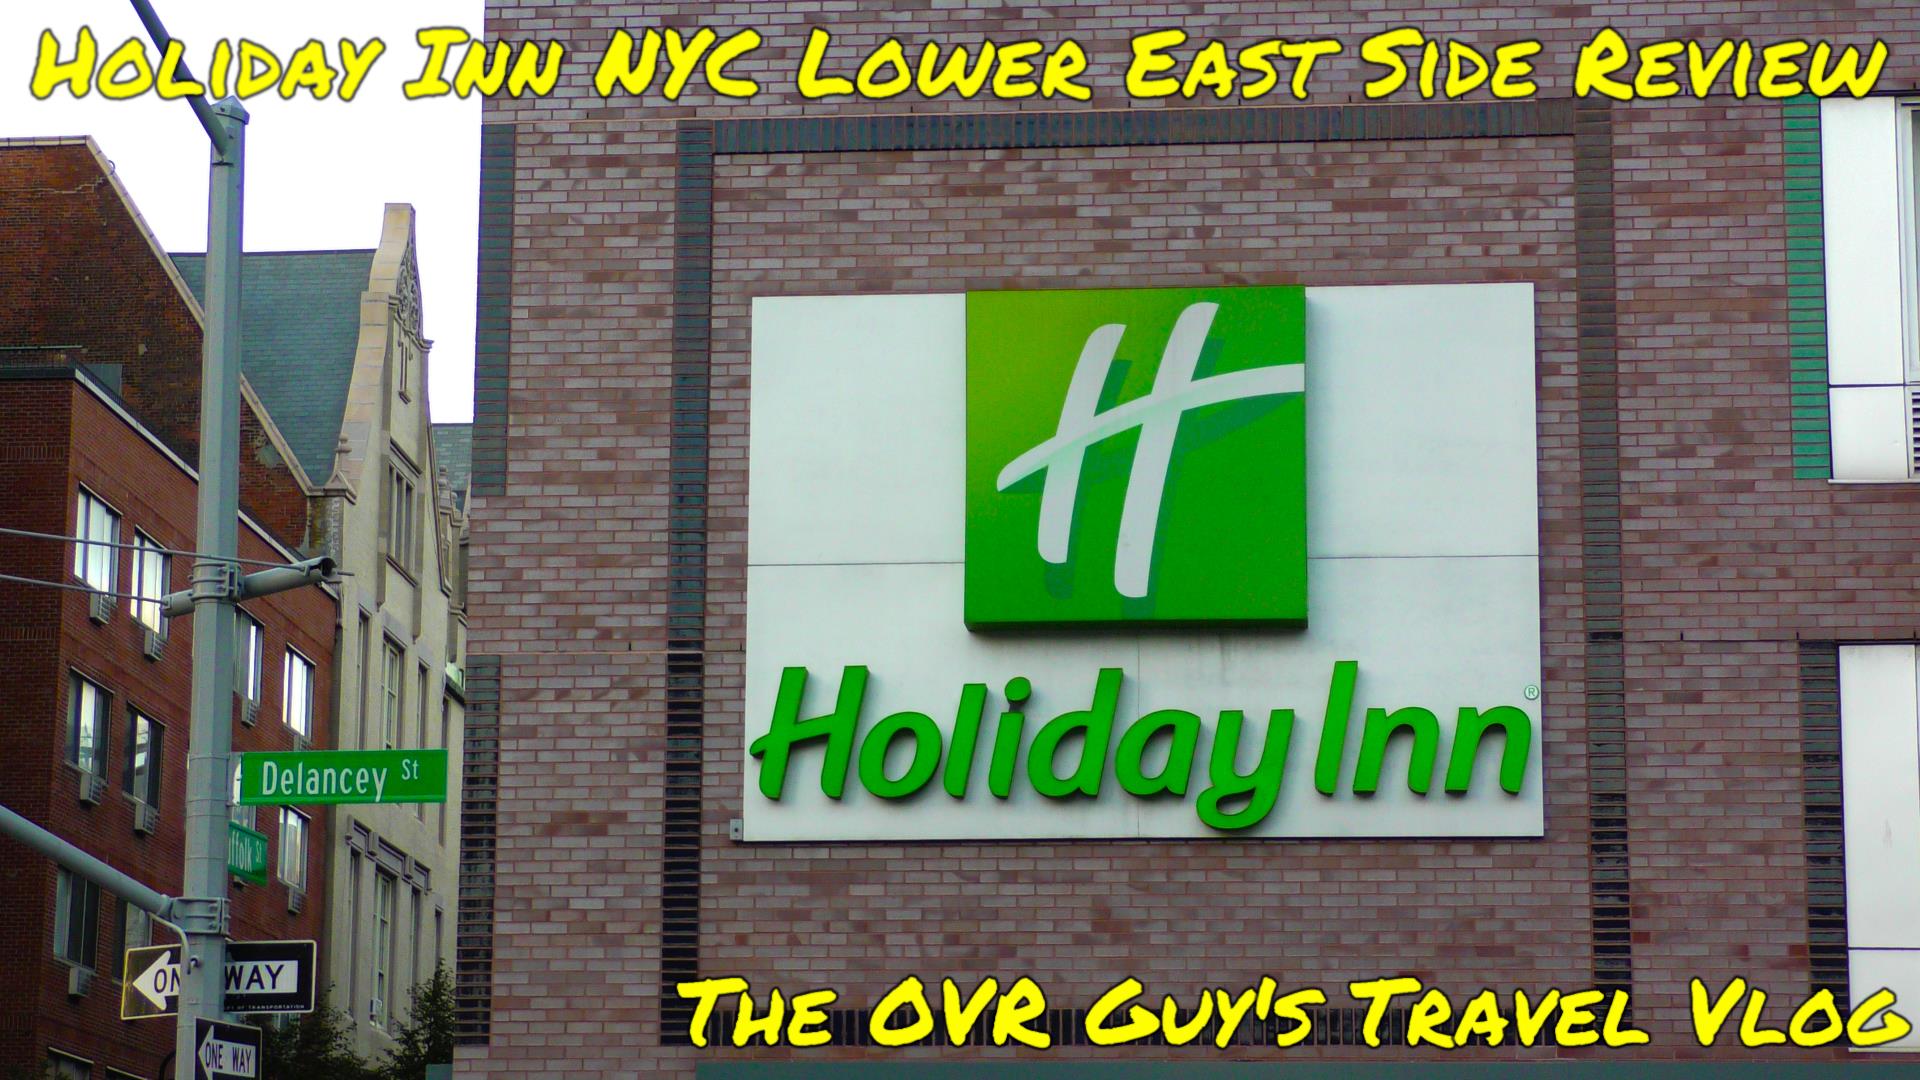 Holiday Inn NYC Lower East Side Review (Thumbnail)